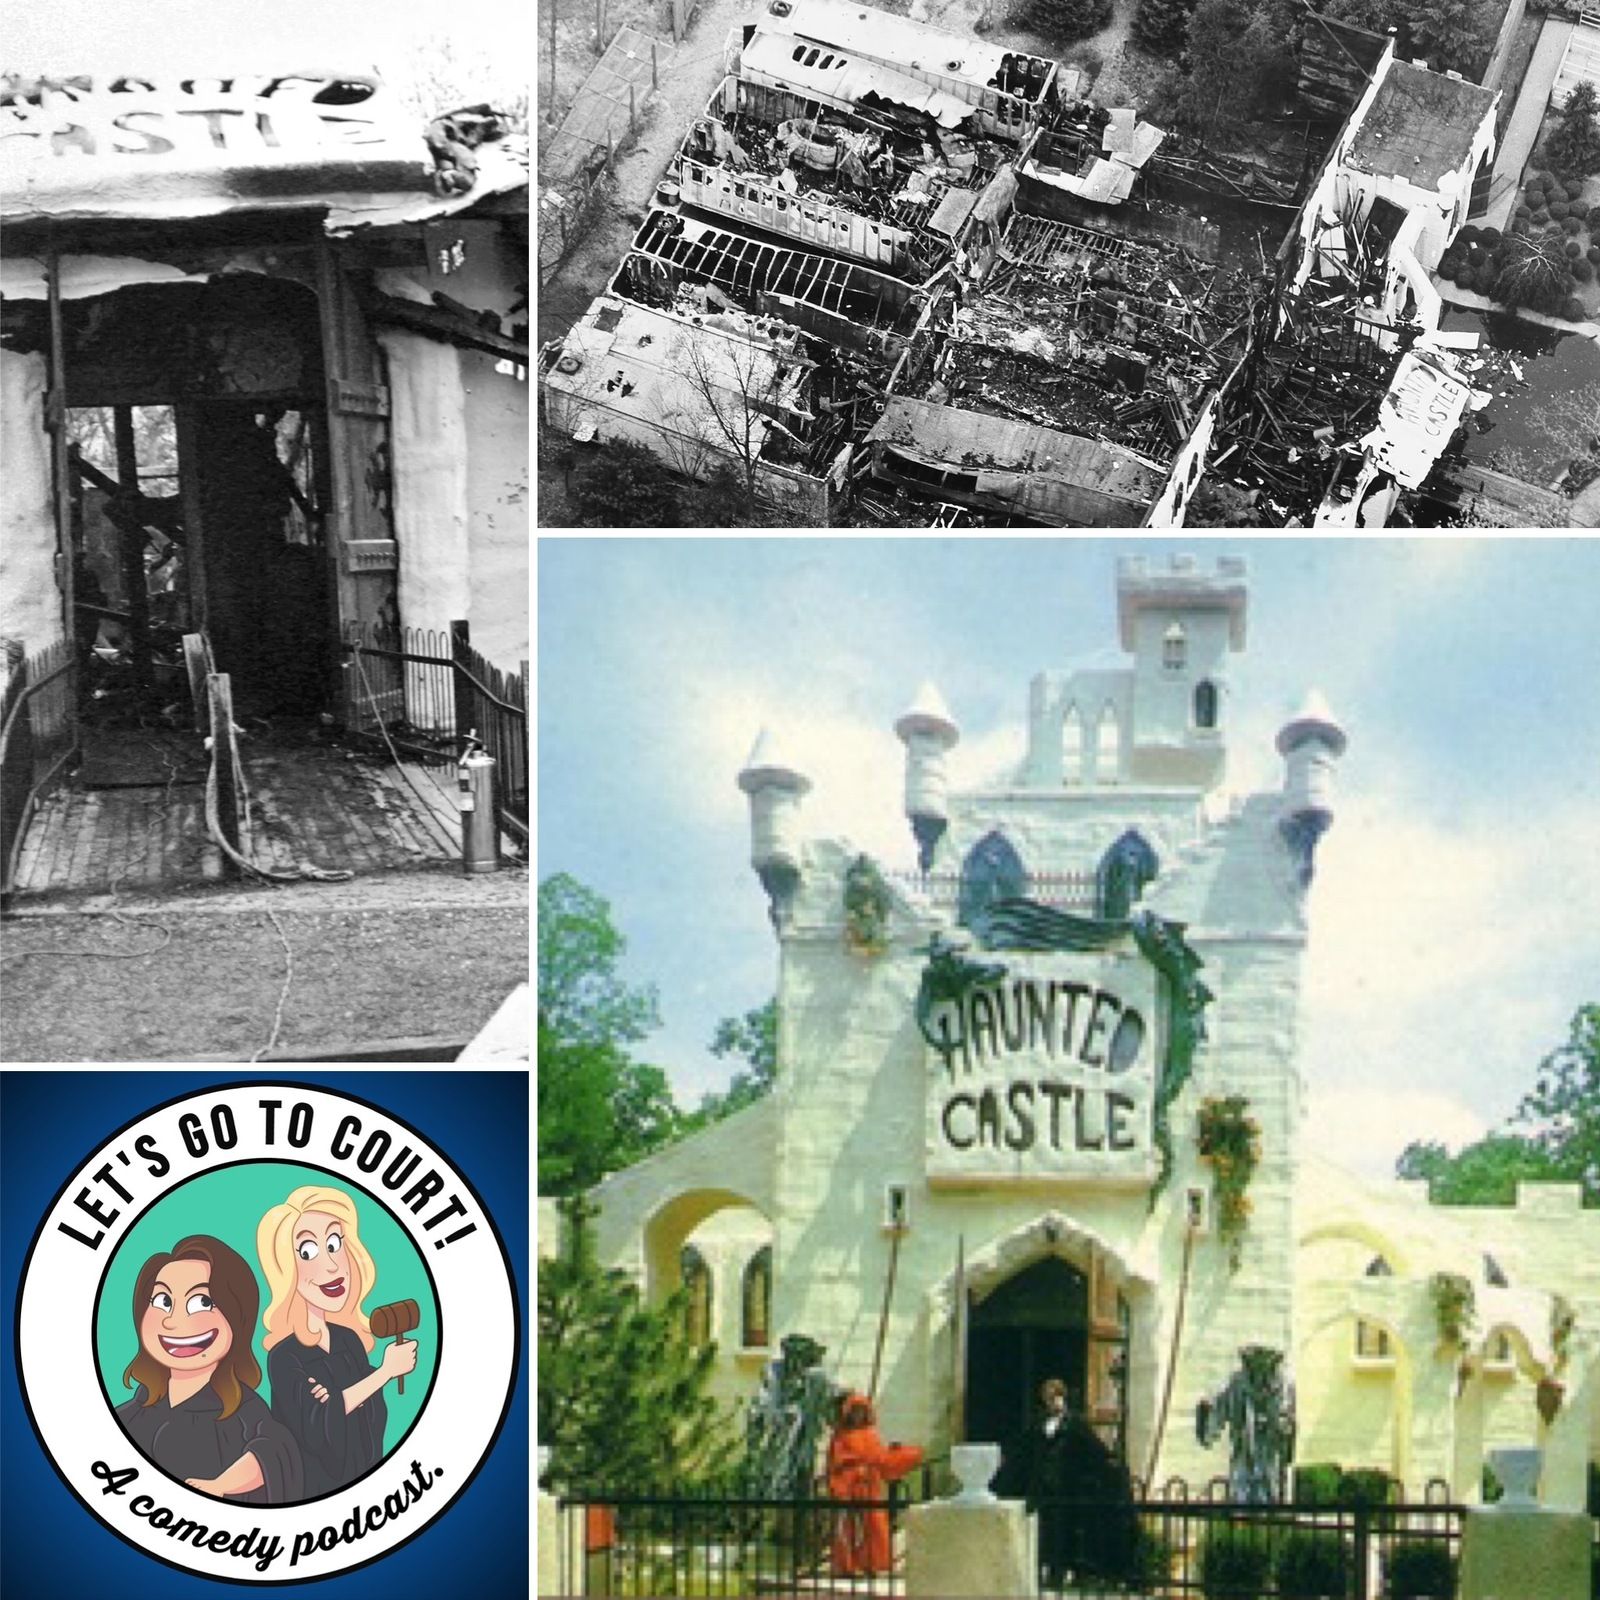 261: The Six Flags Haunted Castle Disaster